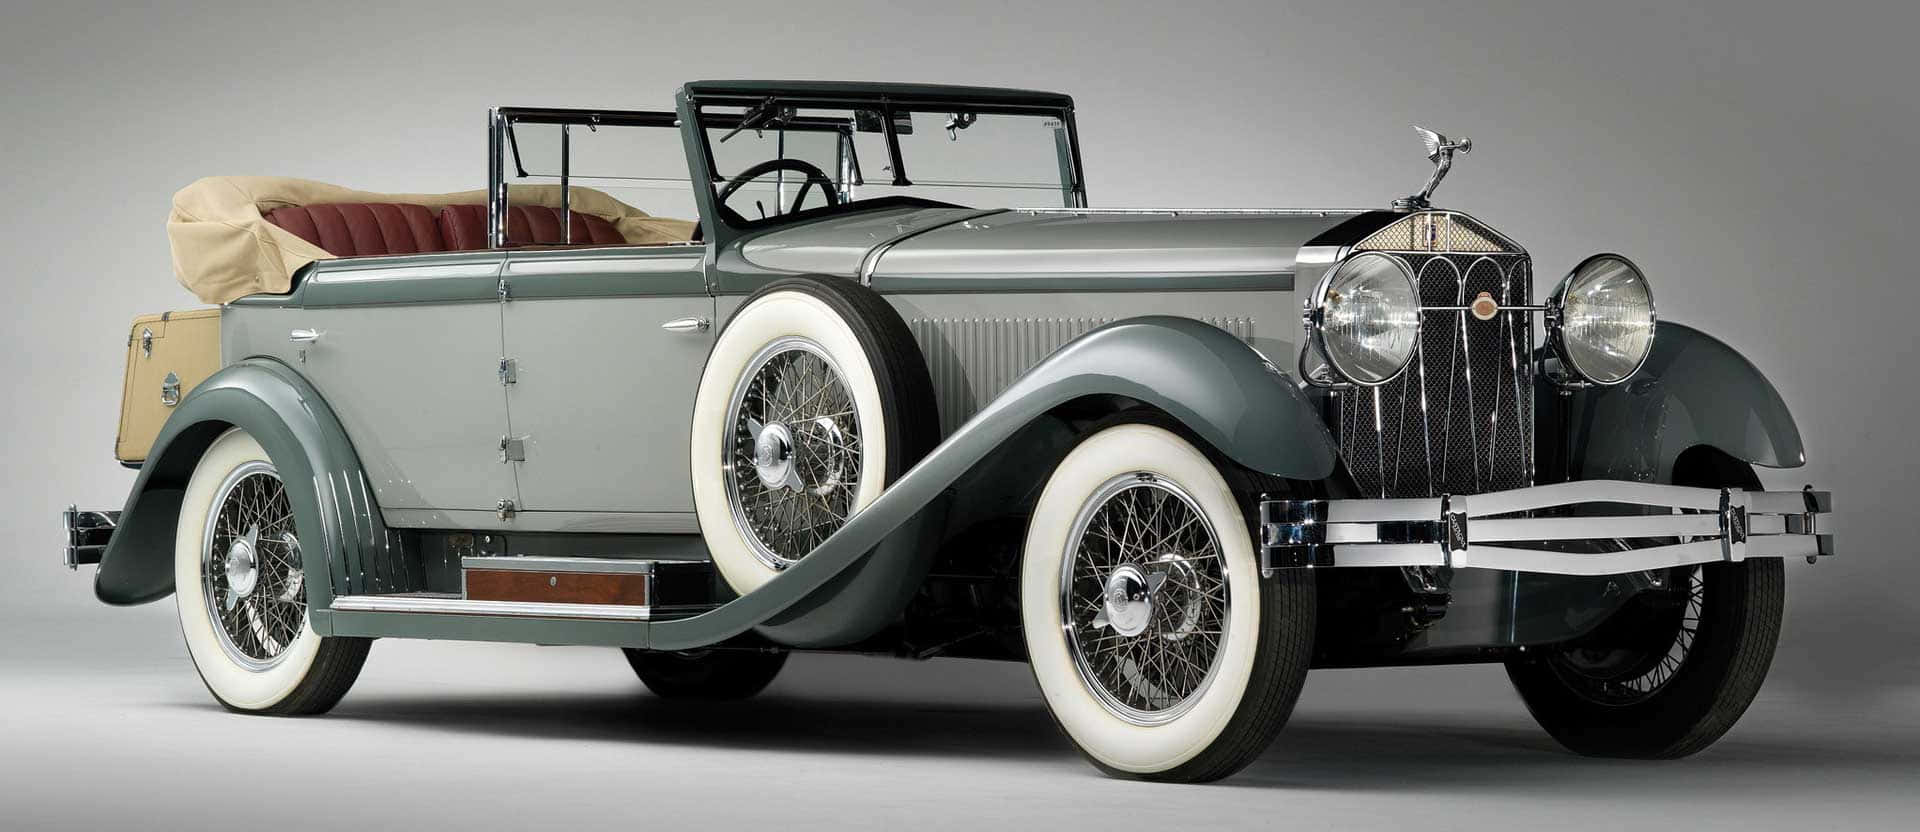 Isotta Fraschini Car pictures